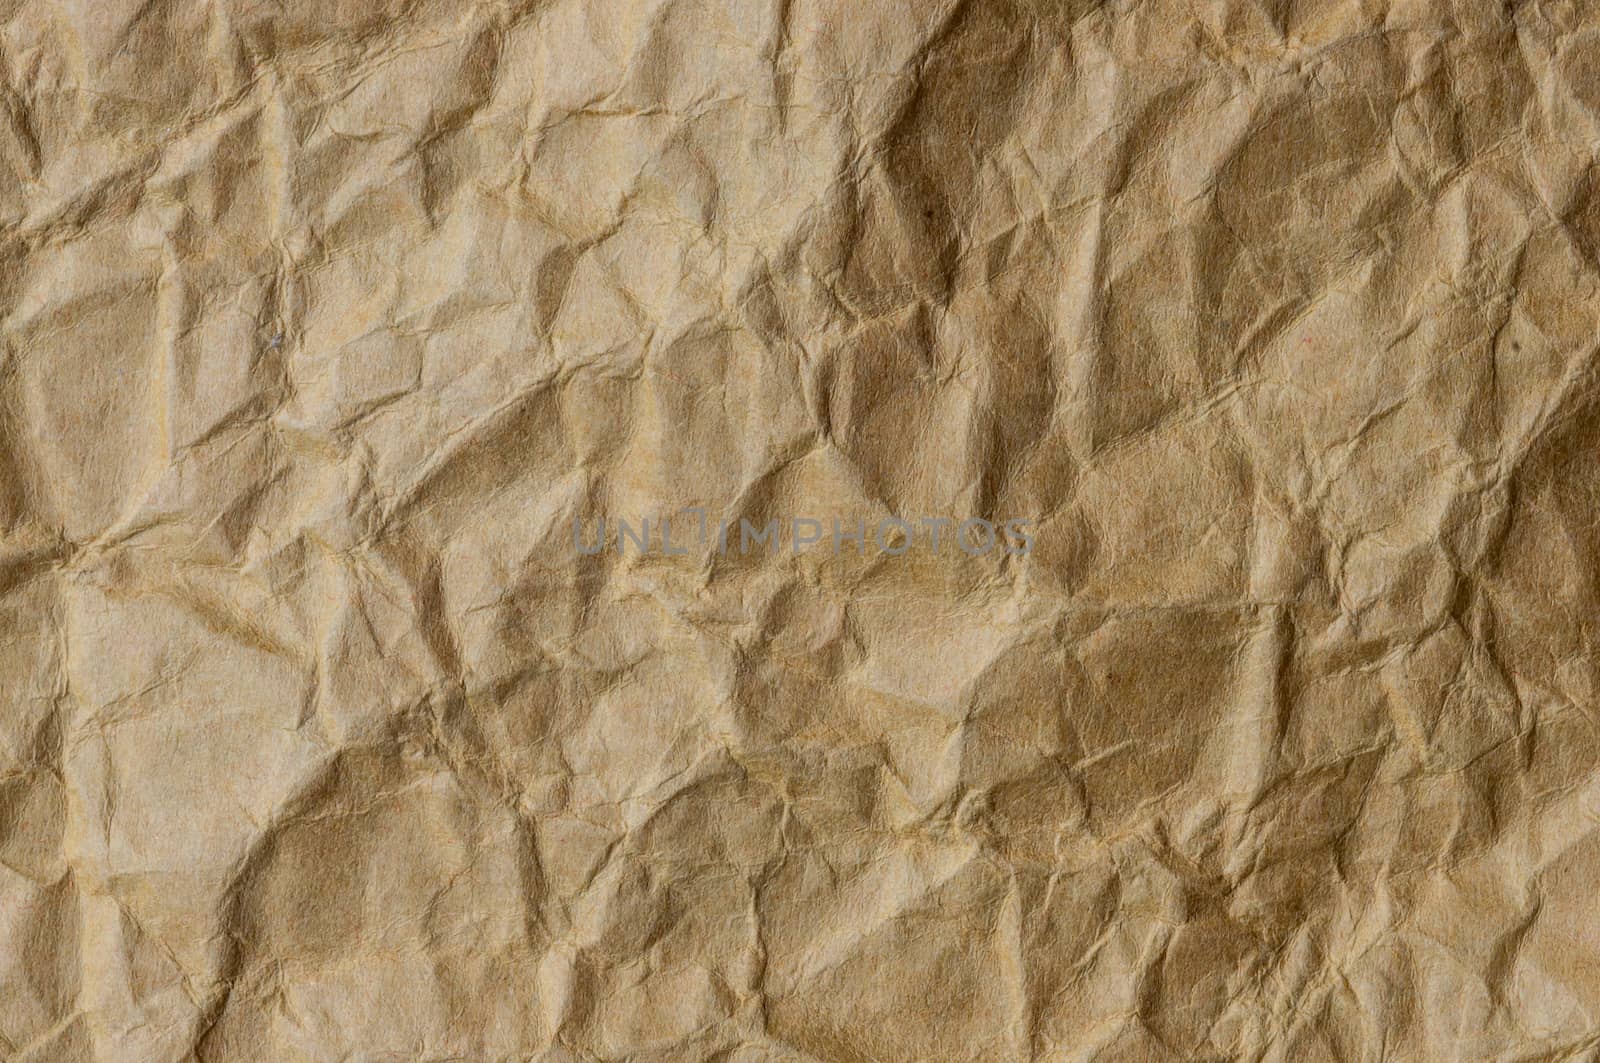 Paper texture by seksan44